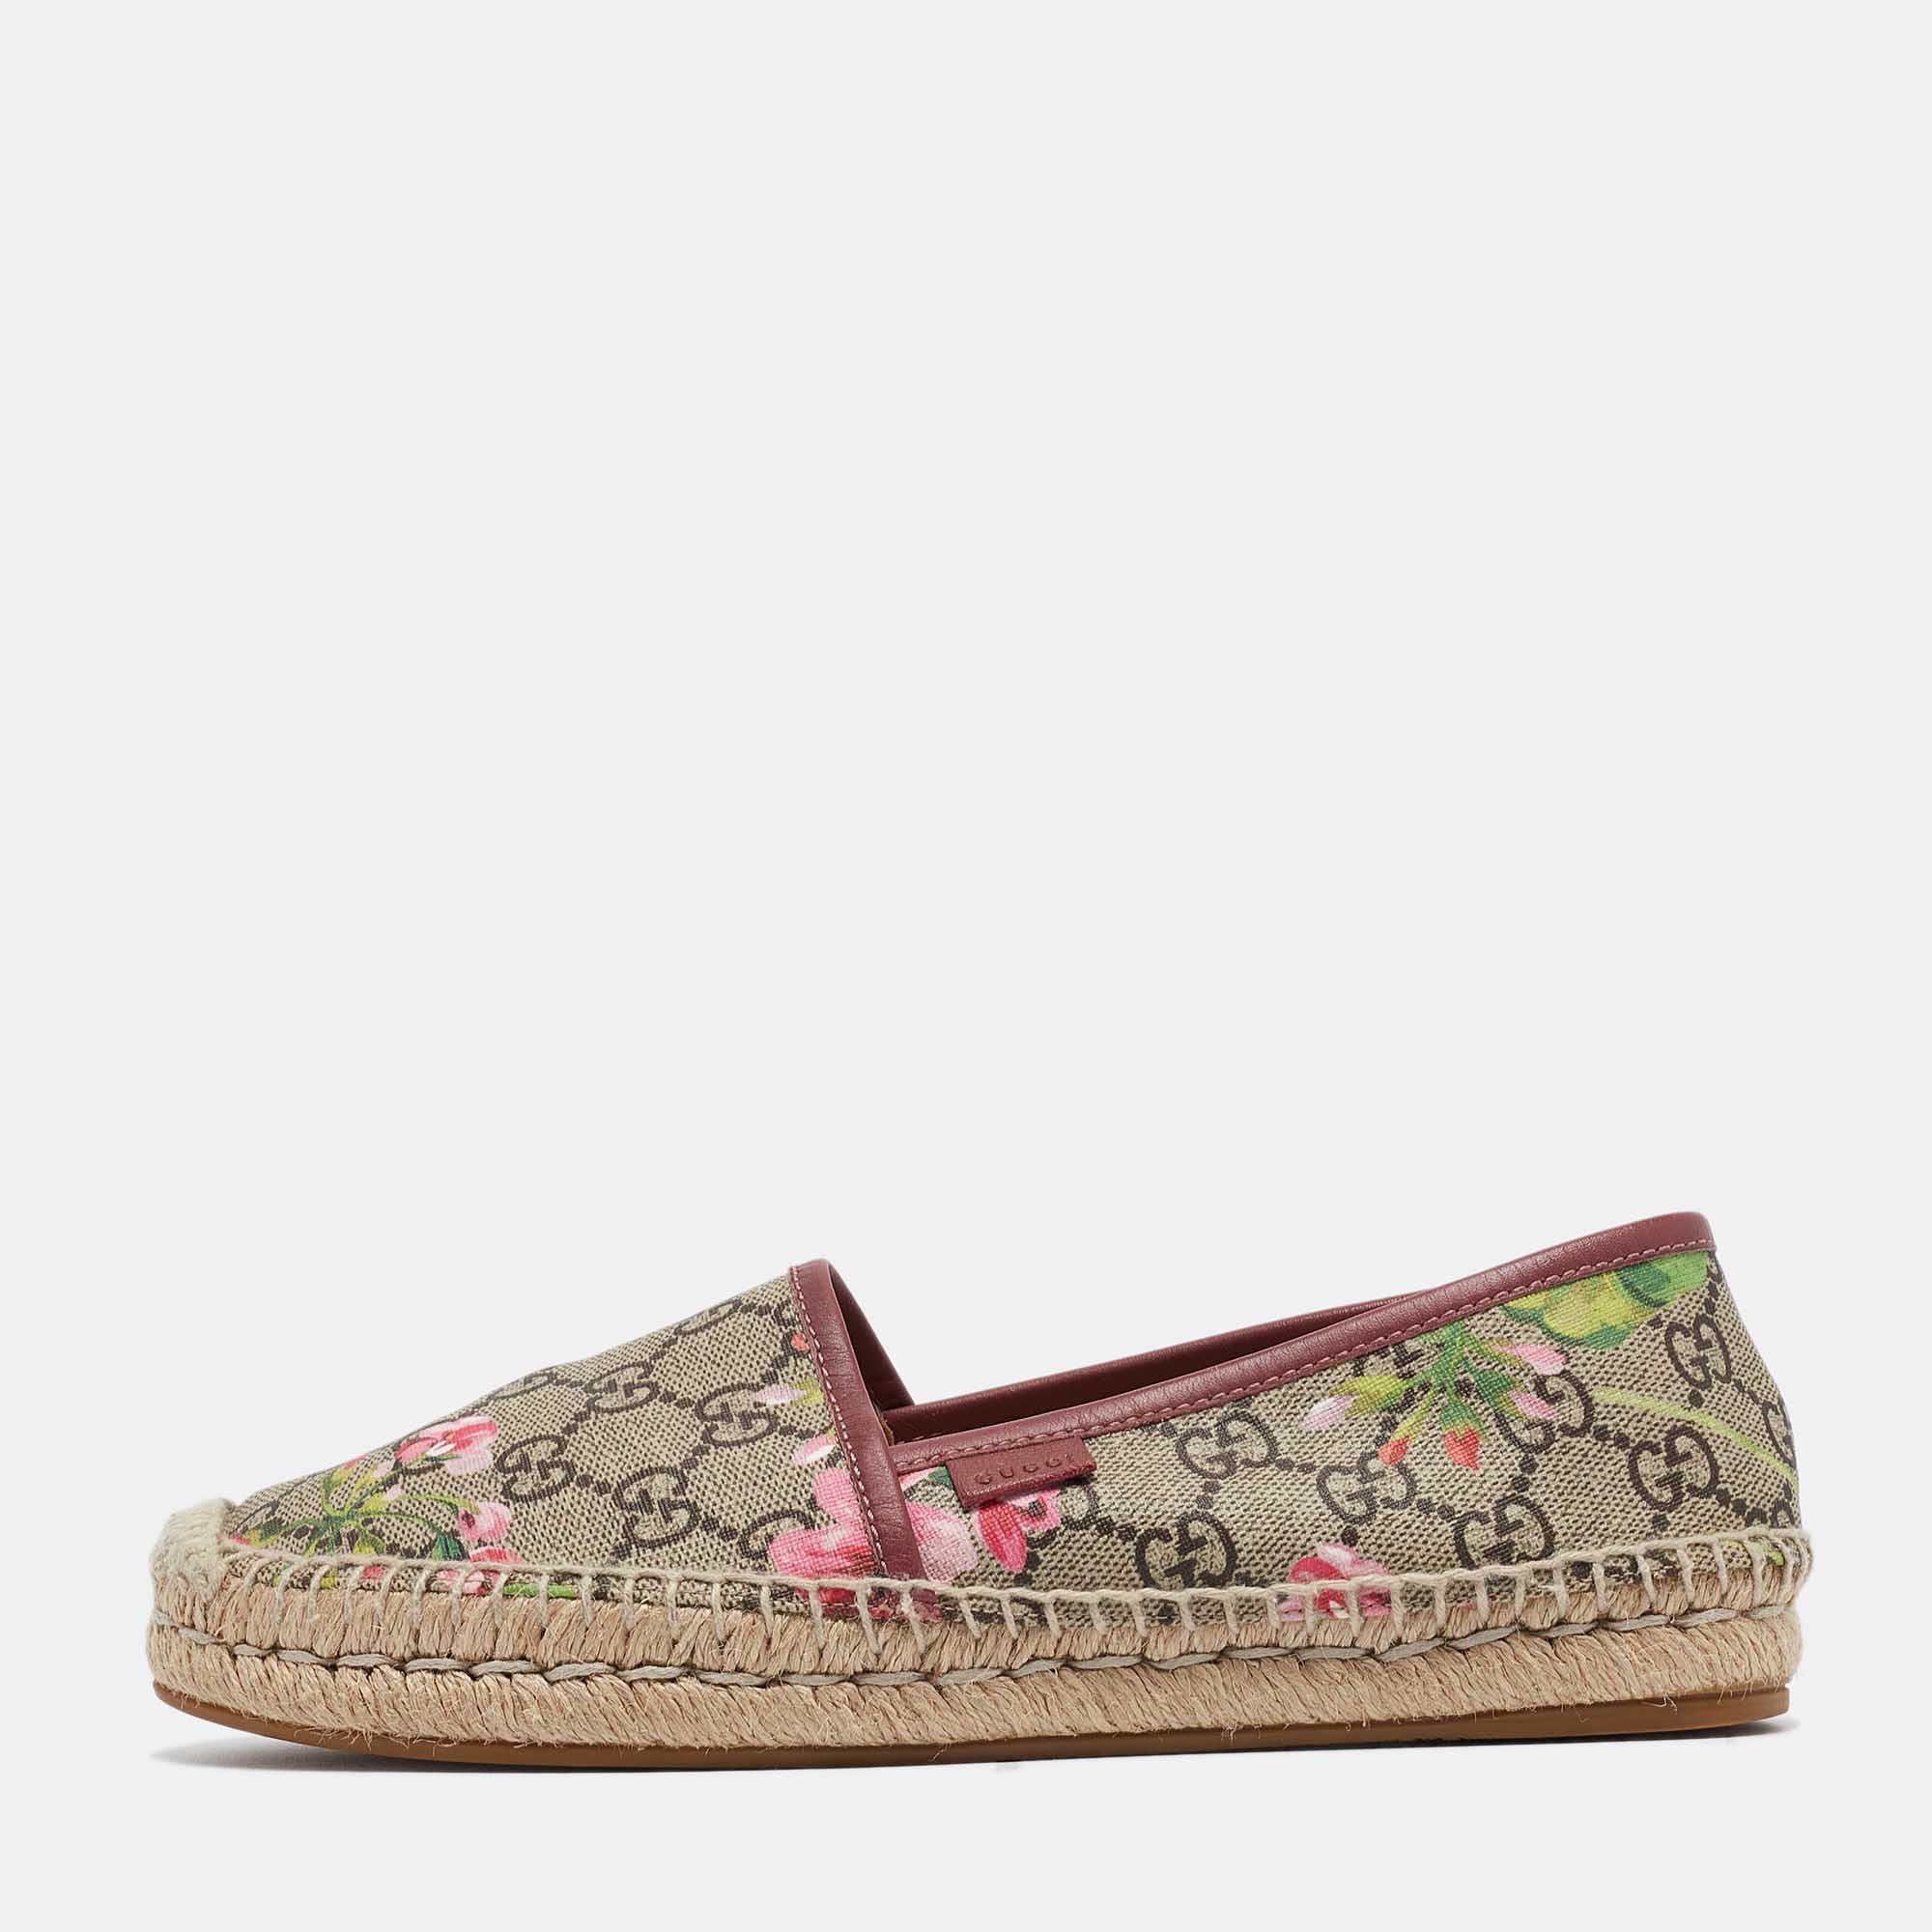 Pre-owned Gucci Beige/brown Gg Blooms Print Supreme Canvas Espadrille Flats Size 37